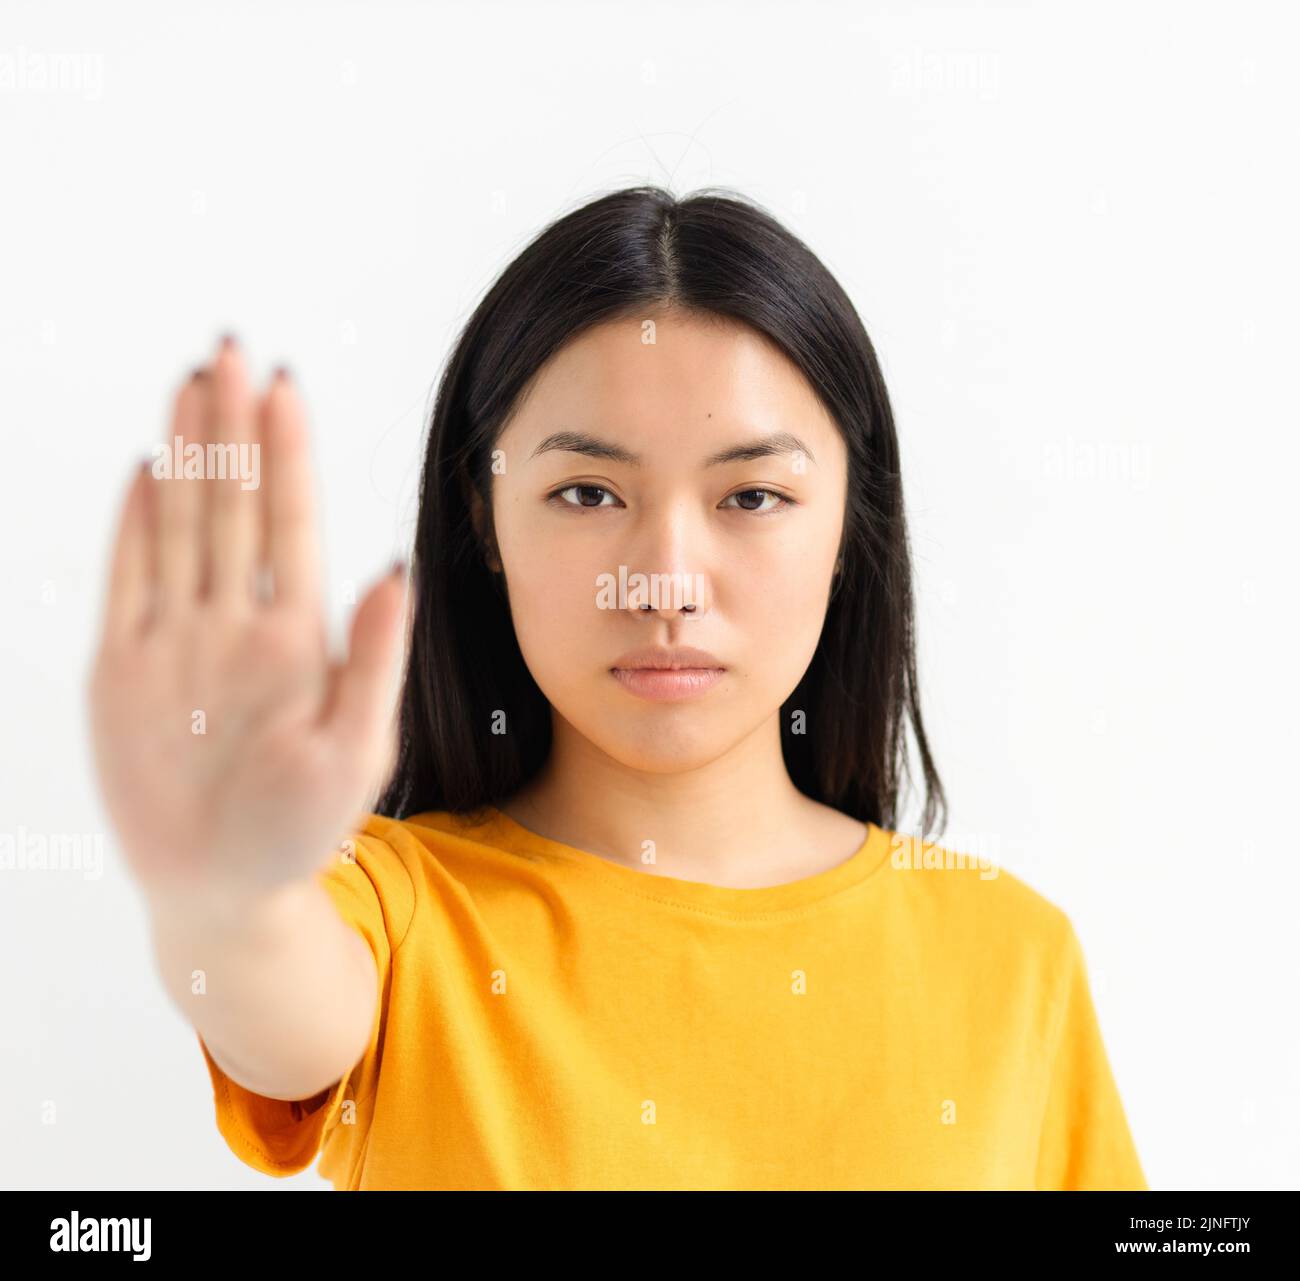 Portrait of young serious Asian woman showing stop gesture and looking at camera on white background Stock Photo